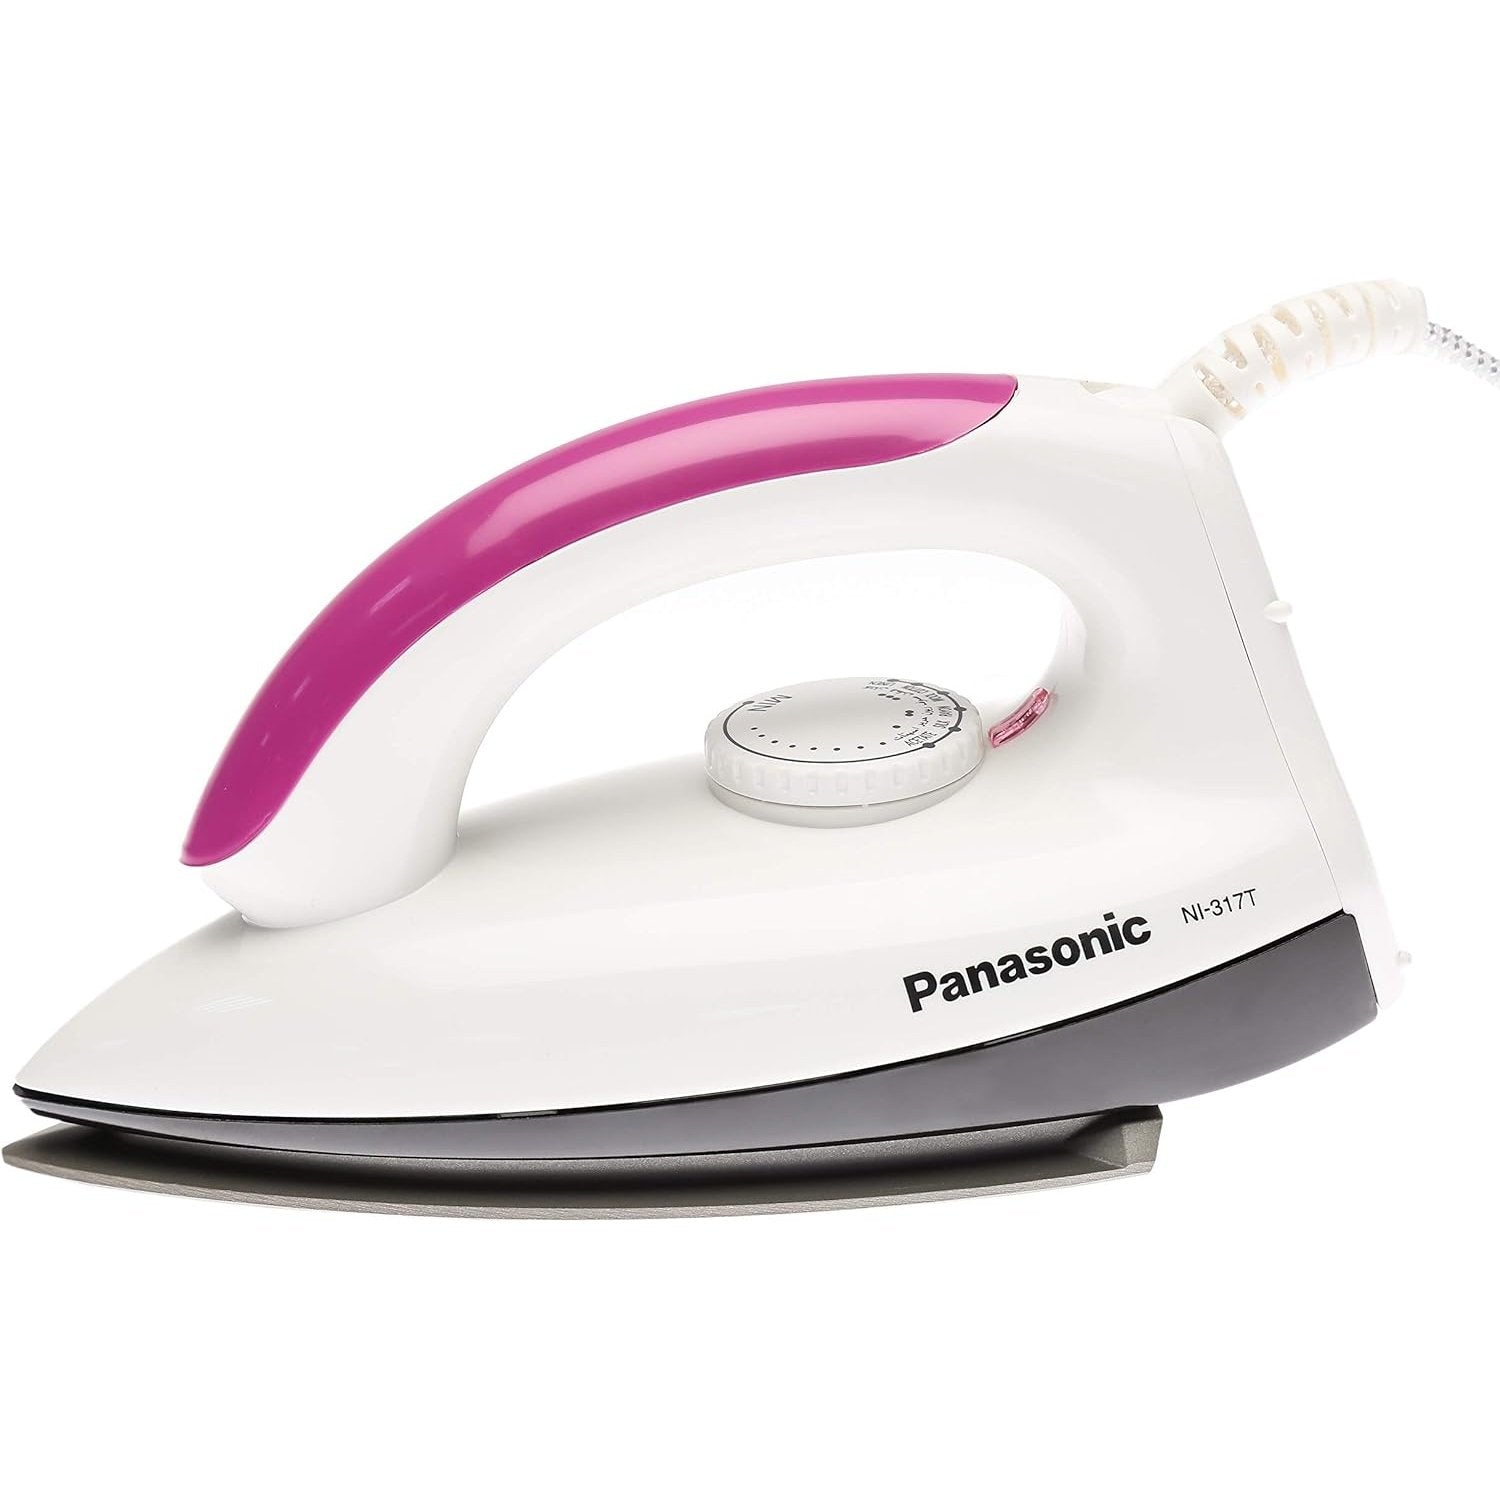 Buy Decakila Steam Iron 2200W - KEEN013B Online in Ghana - Supply Master Electric Iron Buy Tools hardware Building materials